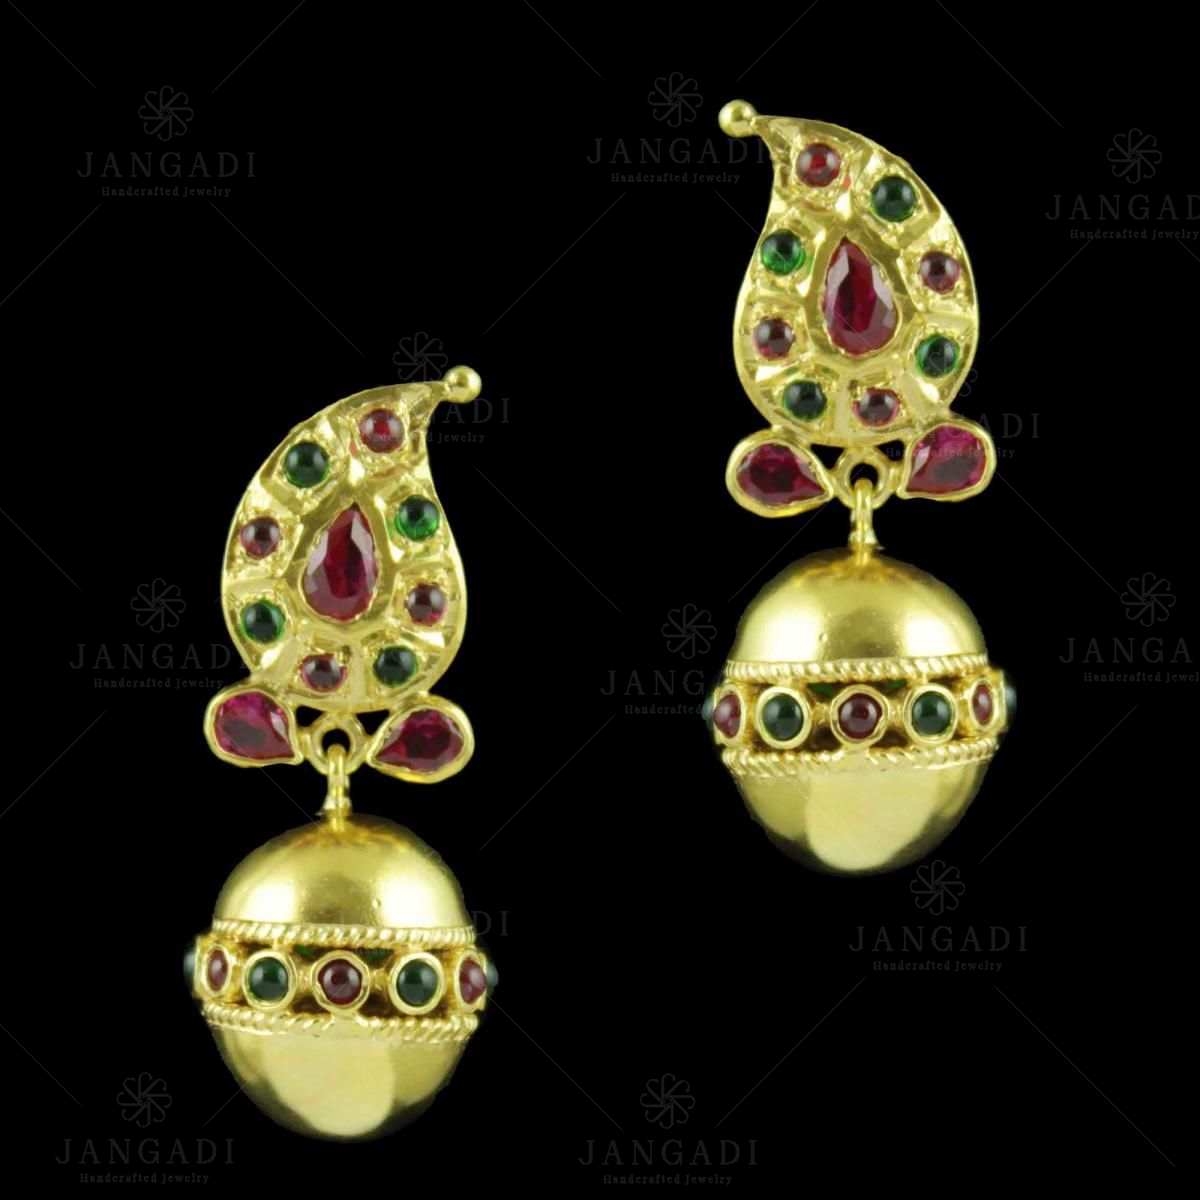 Elegant Mango Design Necklace with Earrings  Mango Design Necklace with  Earrings  Trendy Mango Design Necklace  Arshis